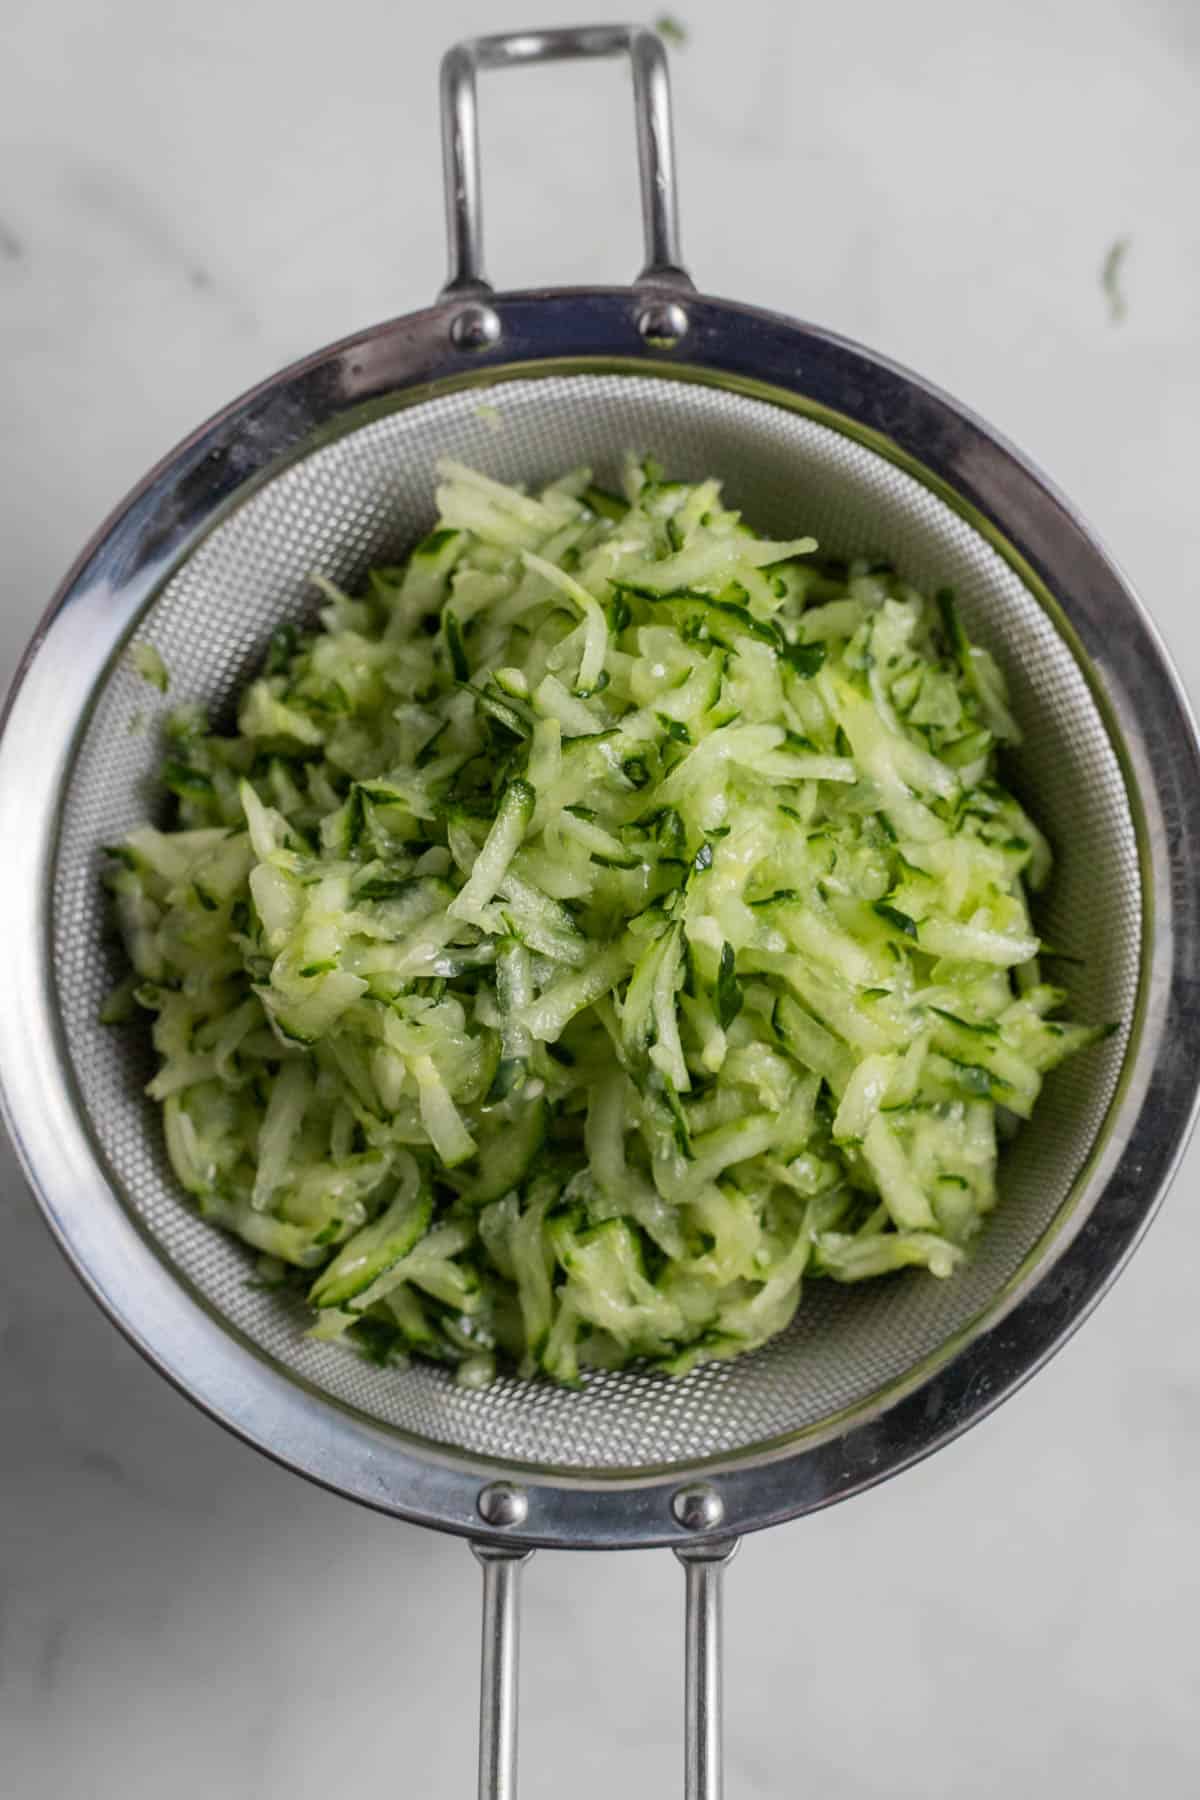 Shredded cucumber in a strainer.